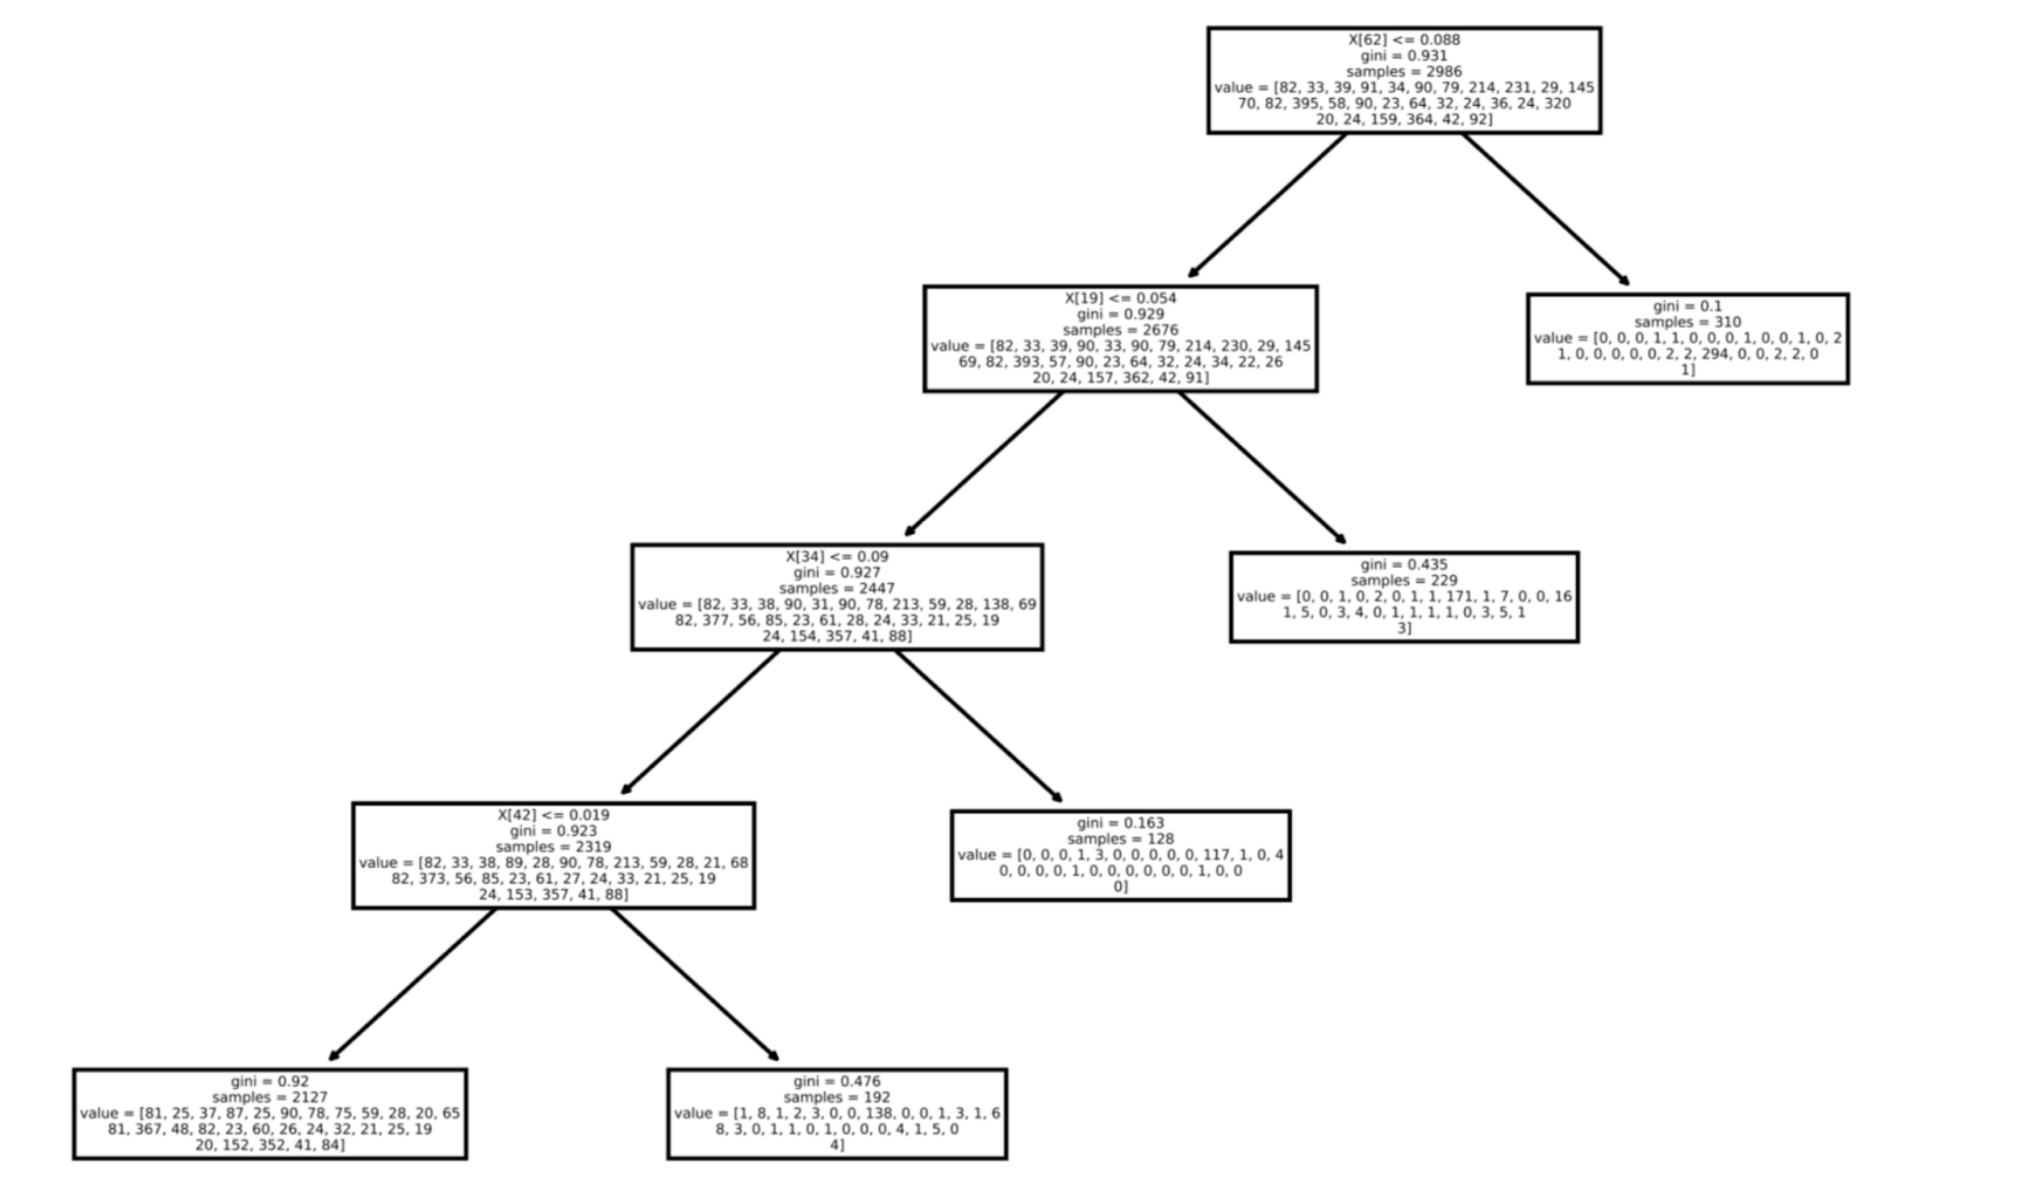 Part of the decision tree model architecture